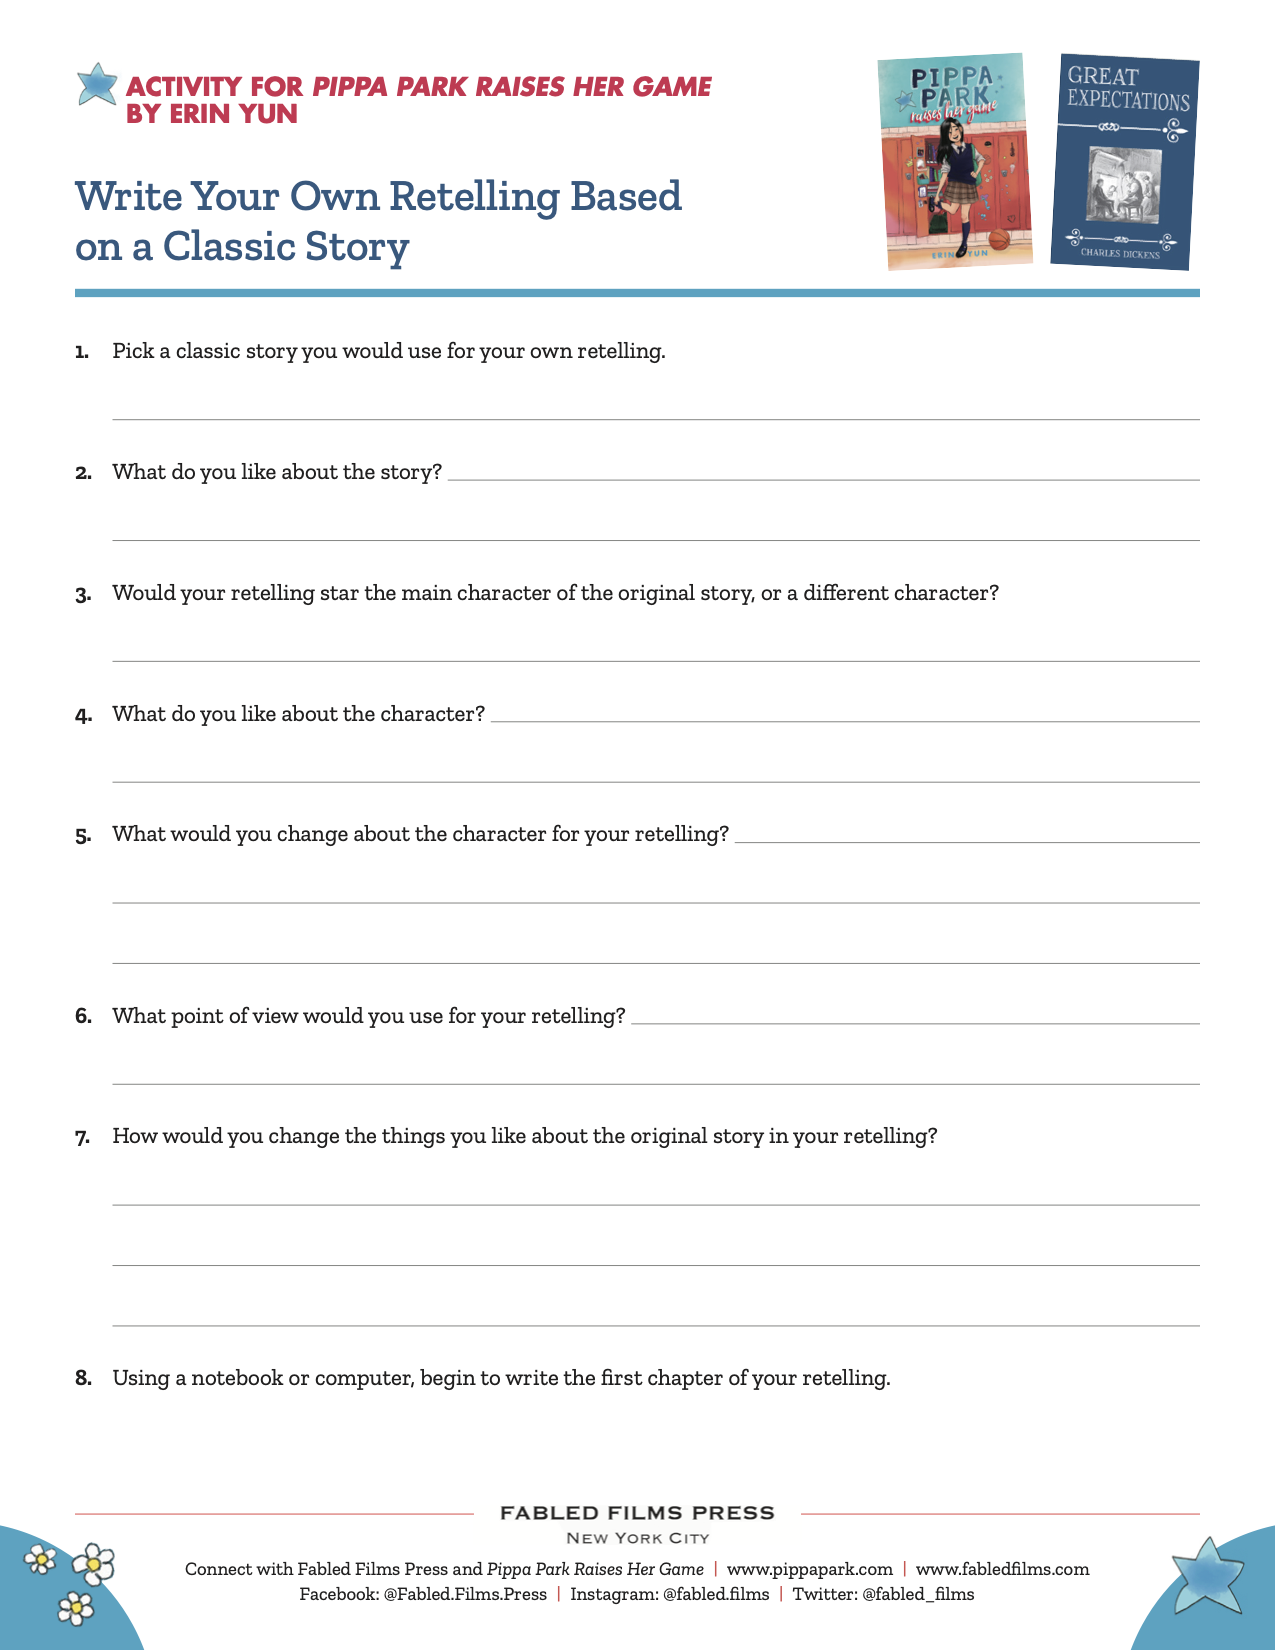 Learn How To Create Your Own Retelling! - Fabled Films Press Inside Retelling A Story Worksheet